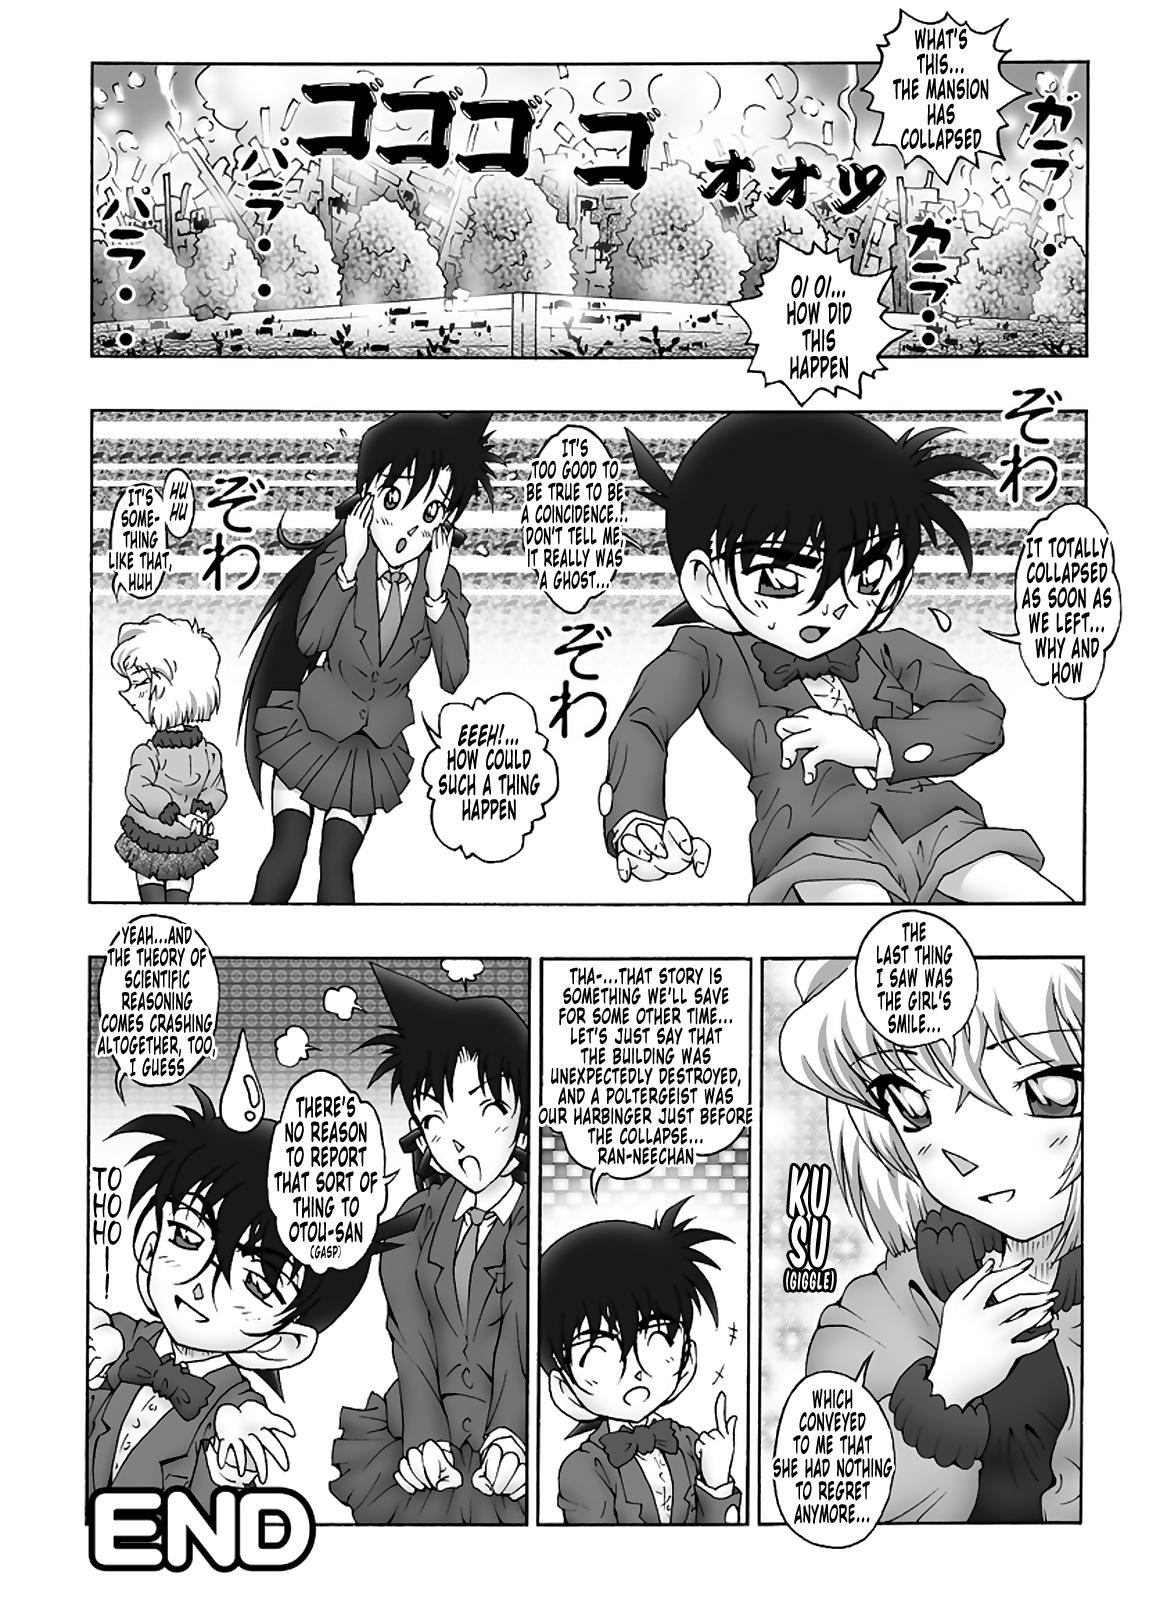 Bumbling Detective Conan - File 10: The Mystery Of The Poltergeist Requiem 18